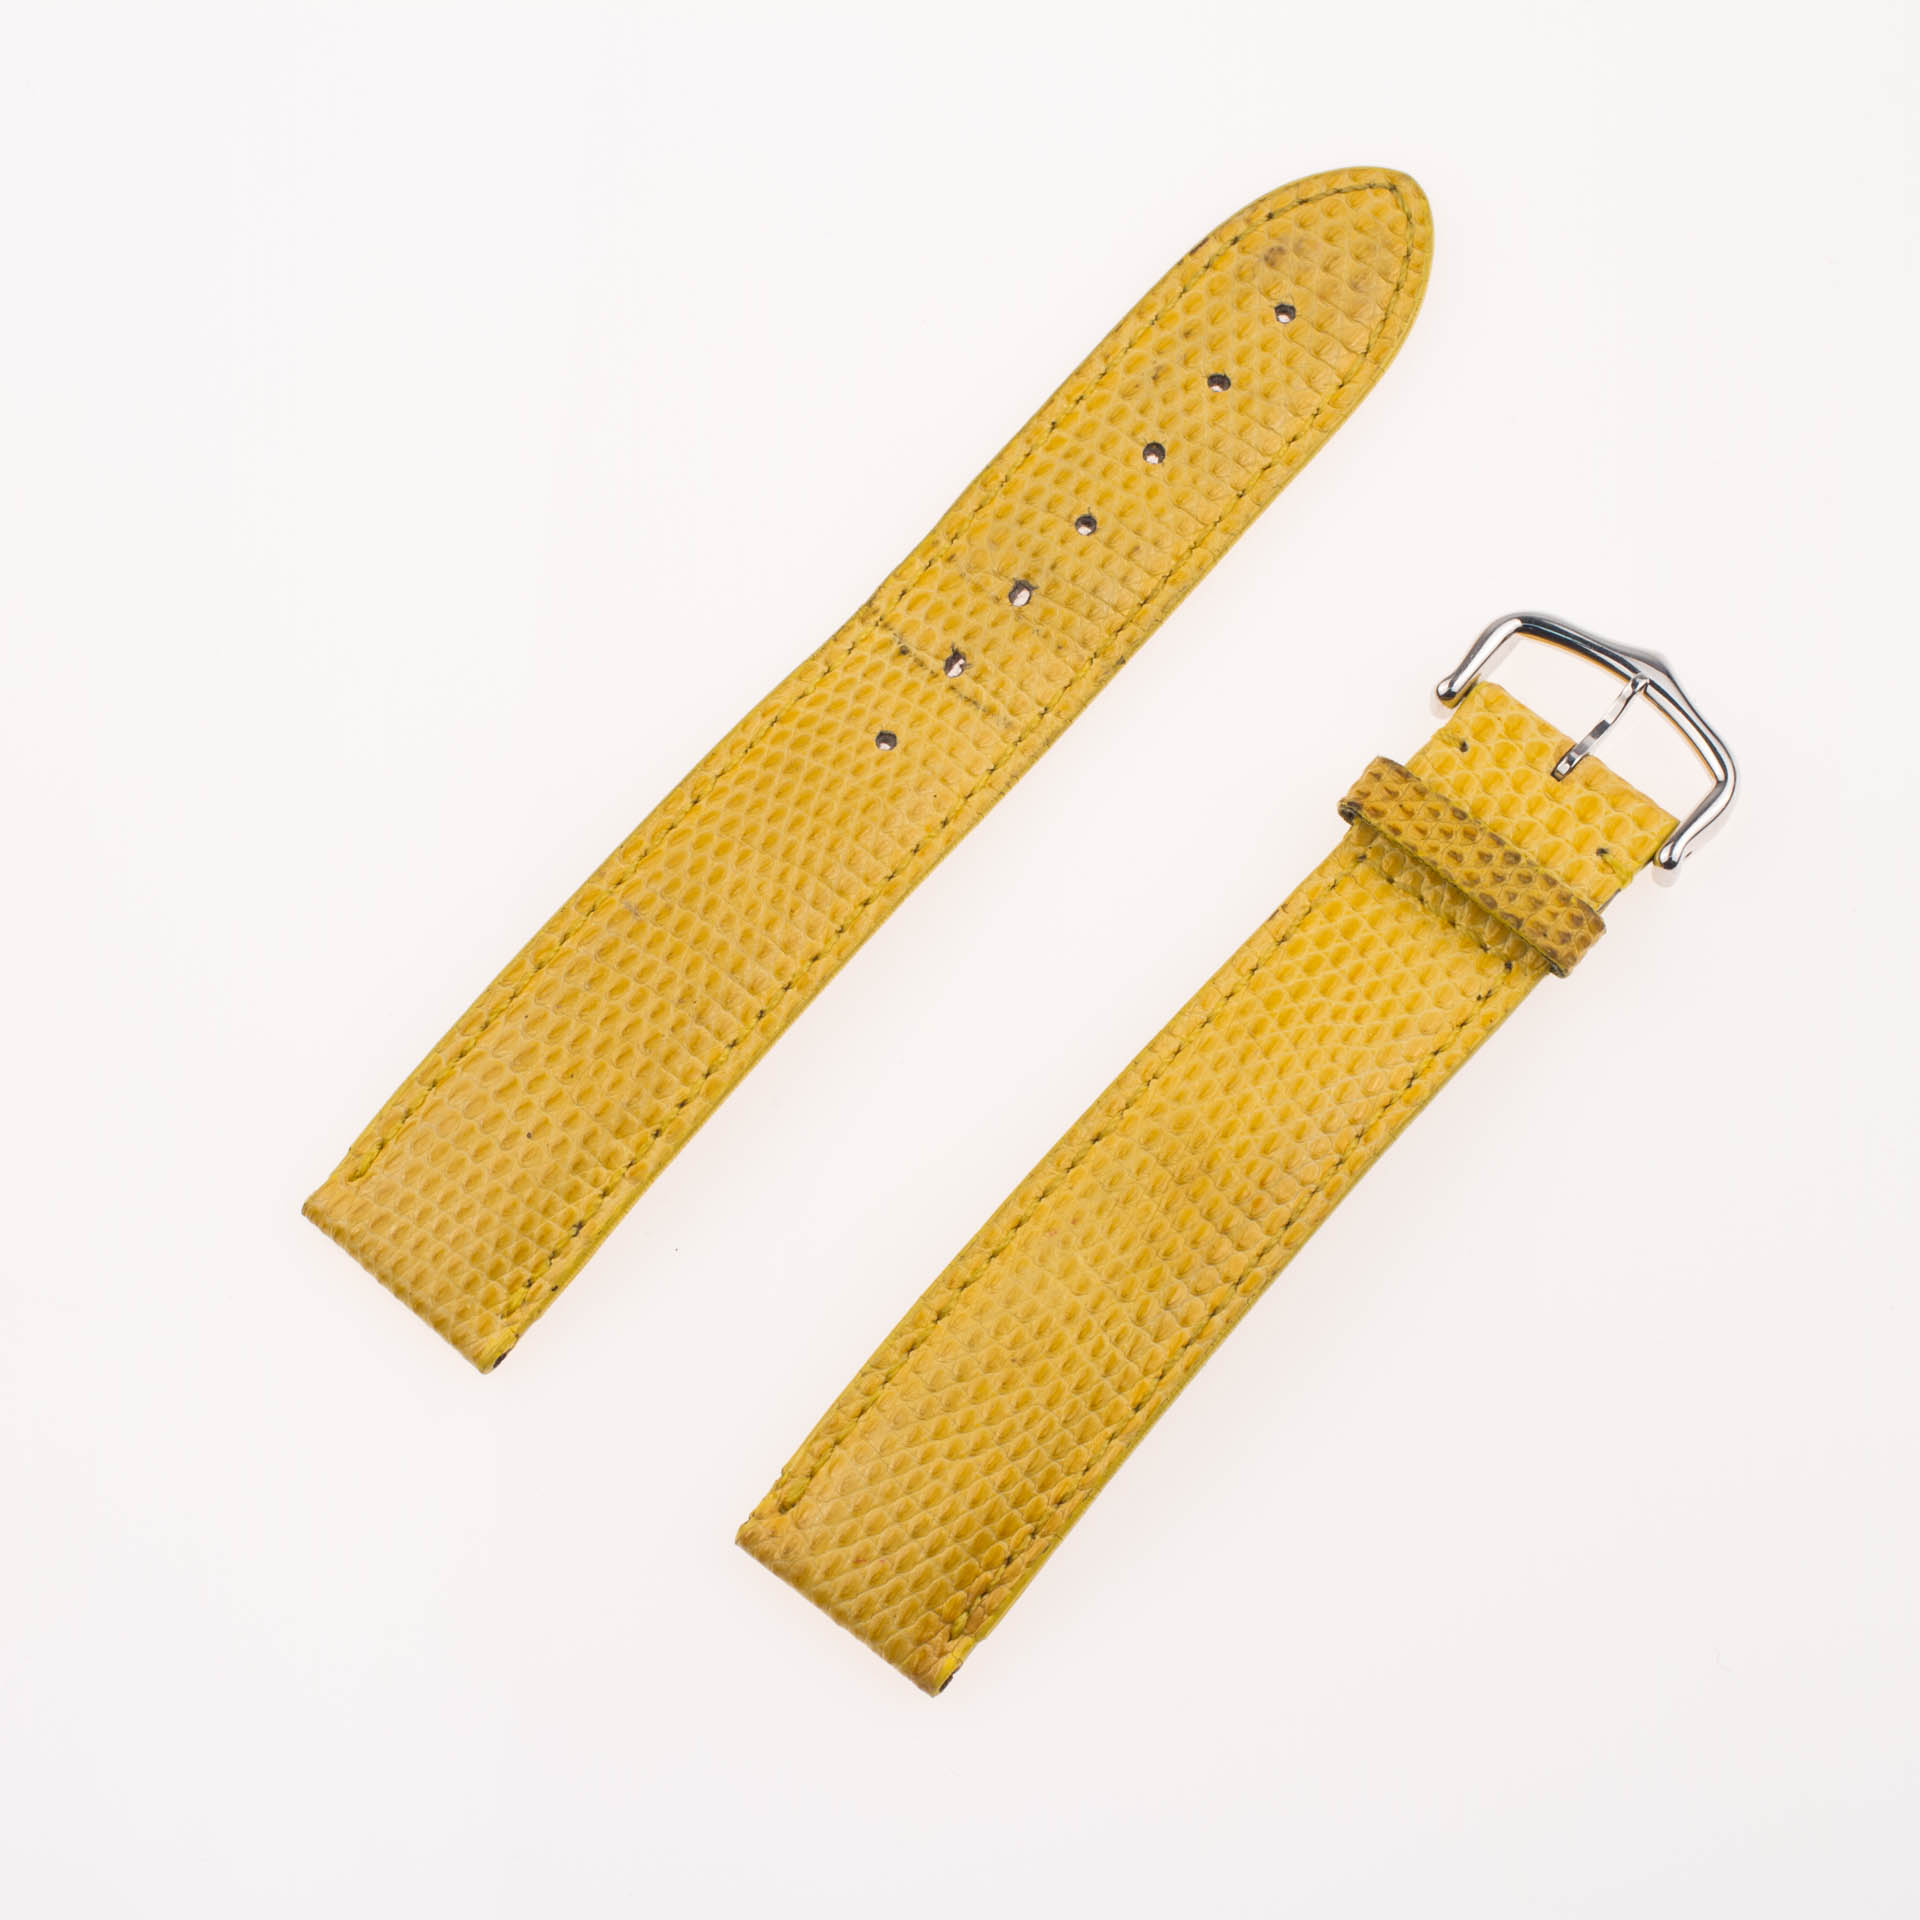 Cartier yellow alligator strap with 18k gold buckle (18mm x 17.5)